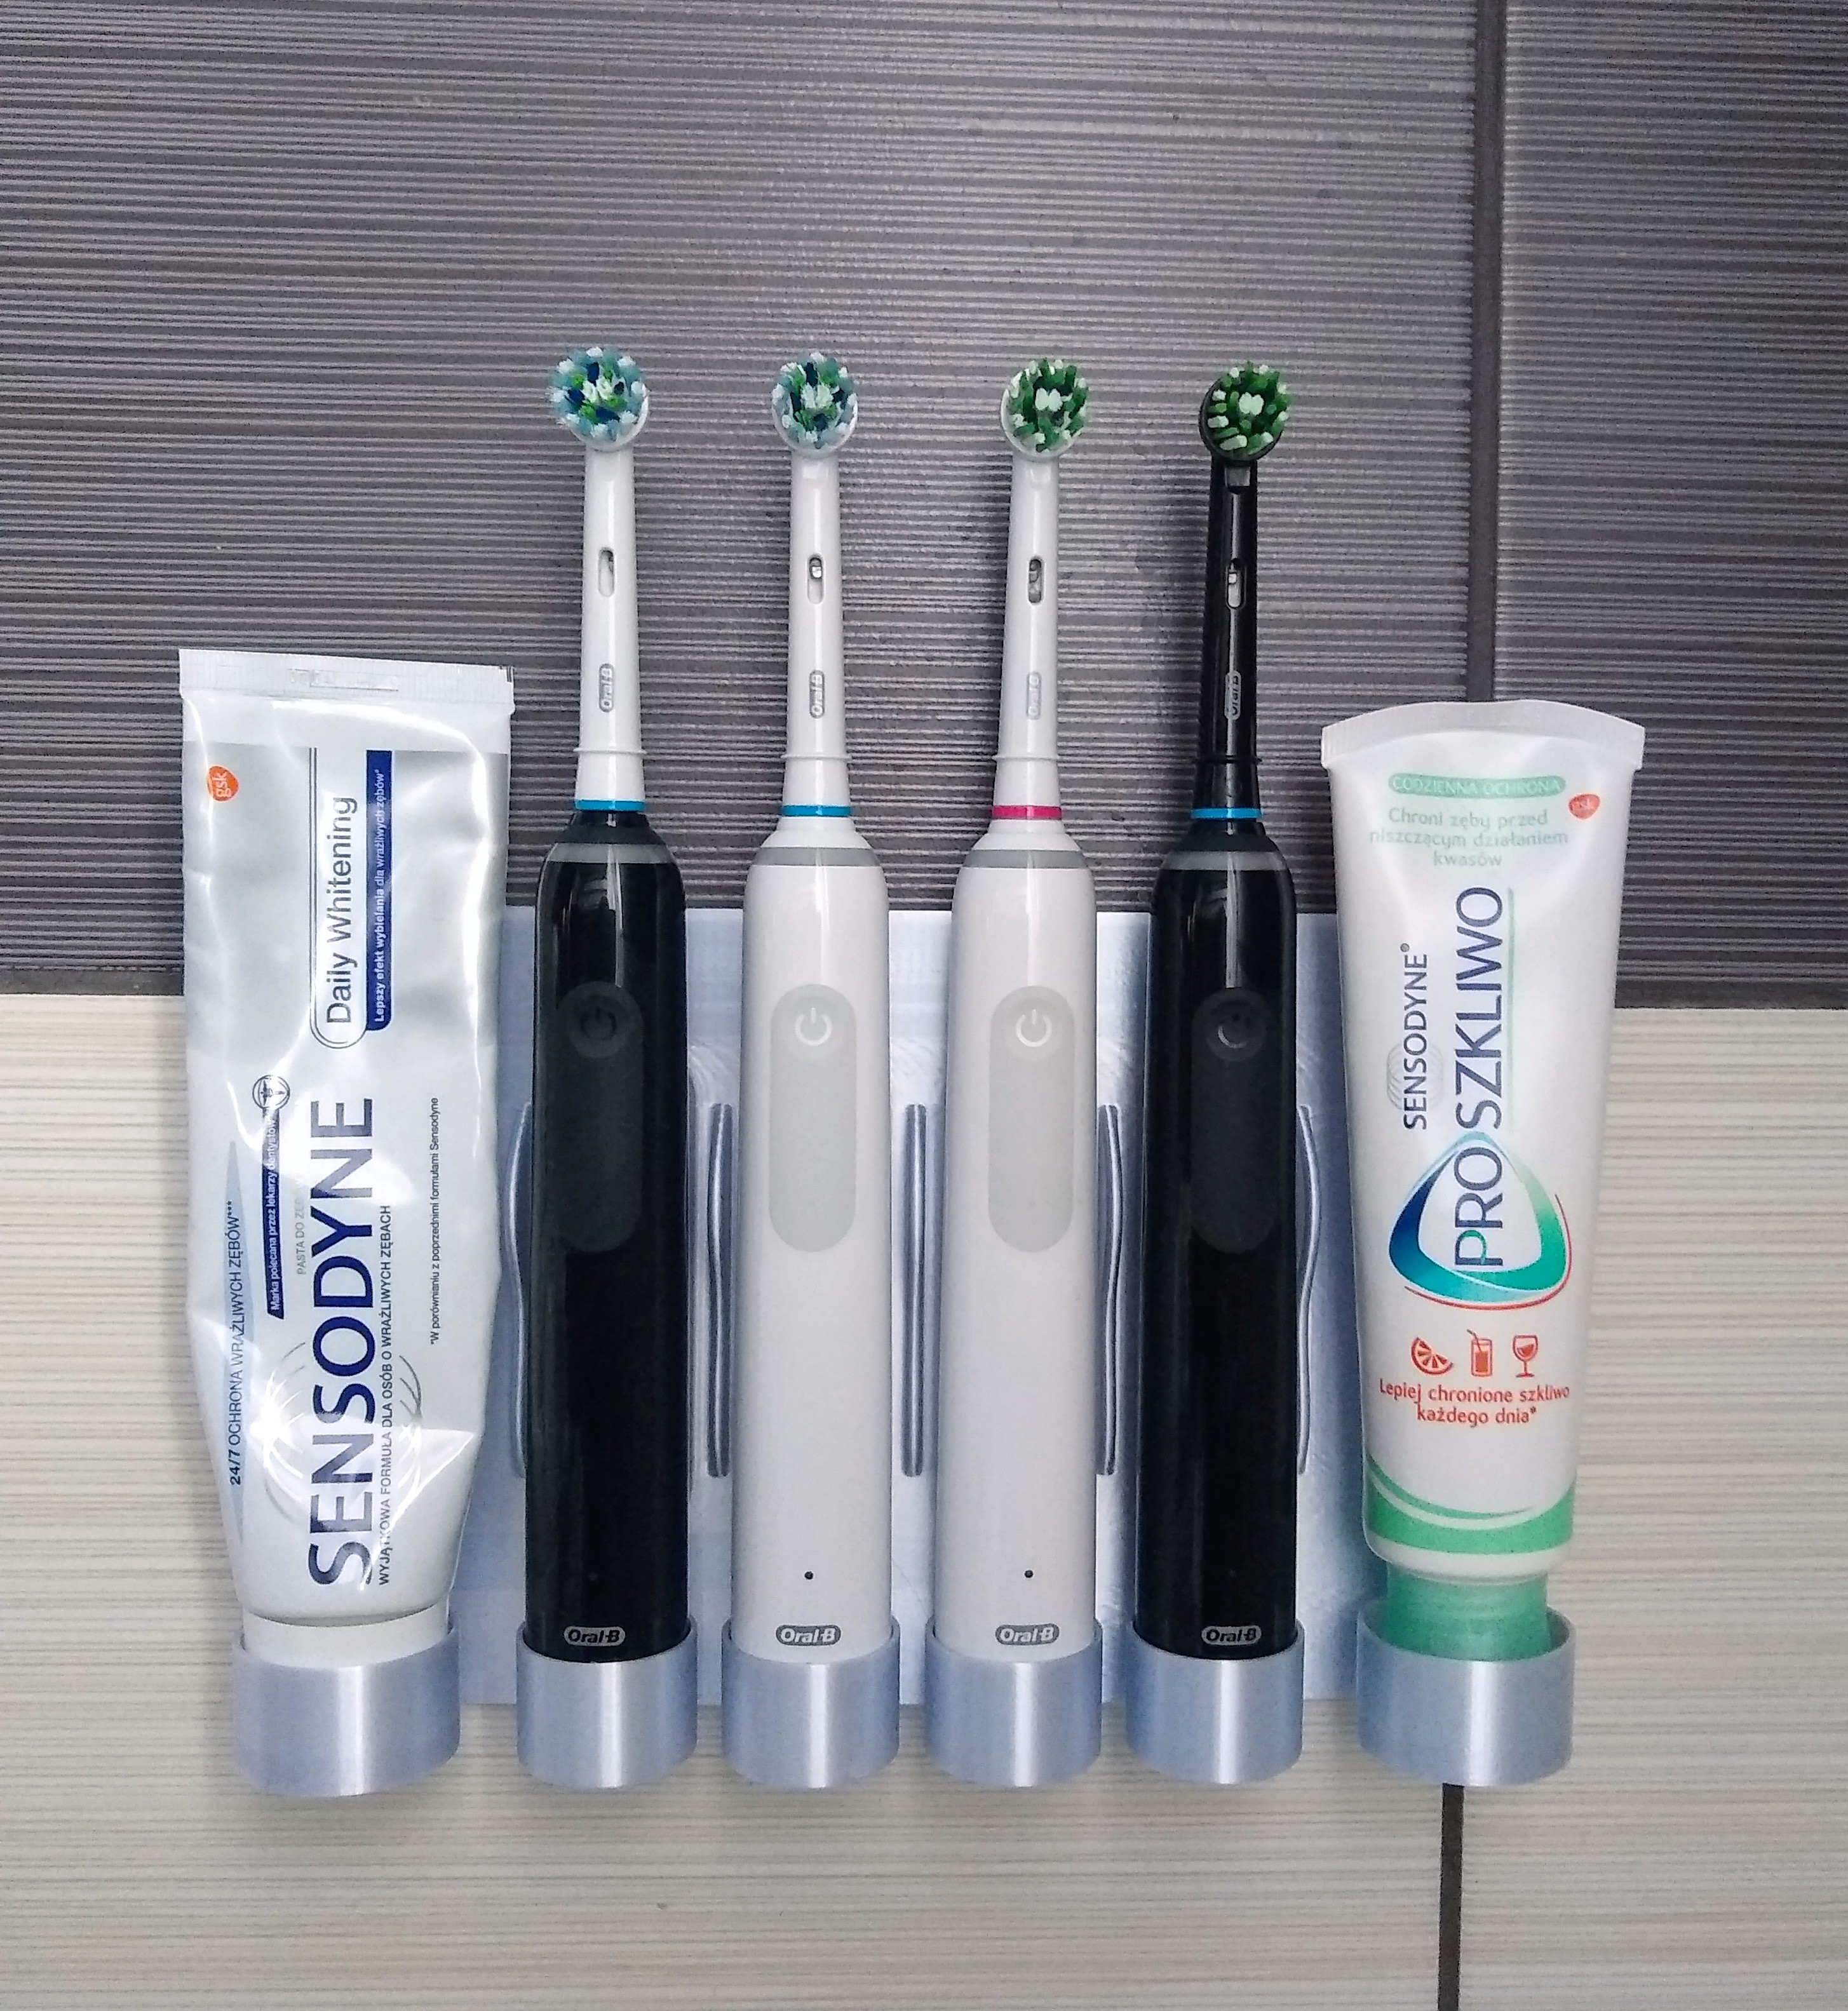 Modular wall mount holder electric toothbrush Oral-B and toothpaste